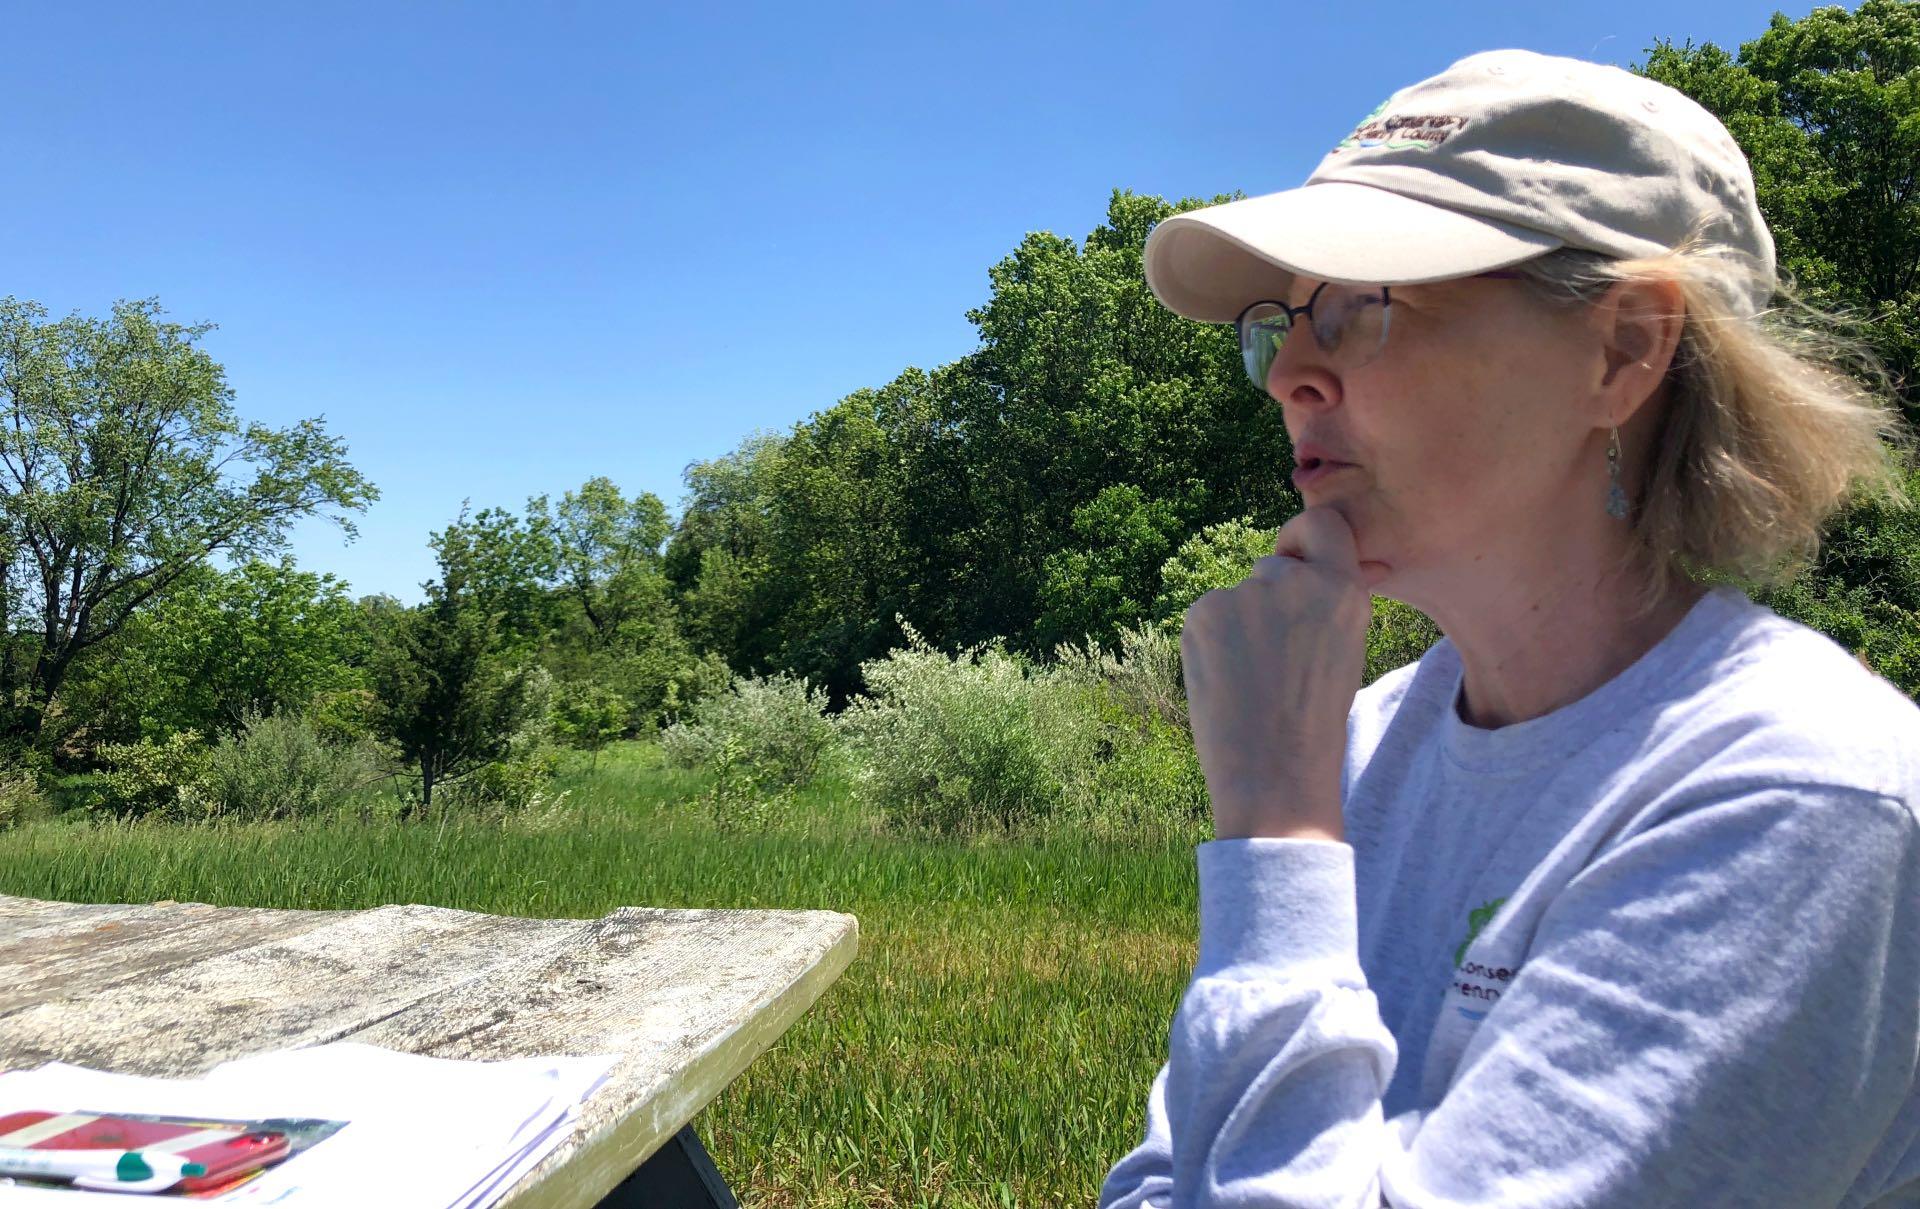 Lisa Haderlein, executive director of The Land Conservancy of McHenry County, sharing the vision for Thompson Road Farm. (Patty Wetli / WTTW News)